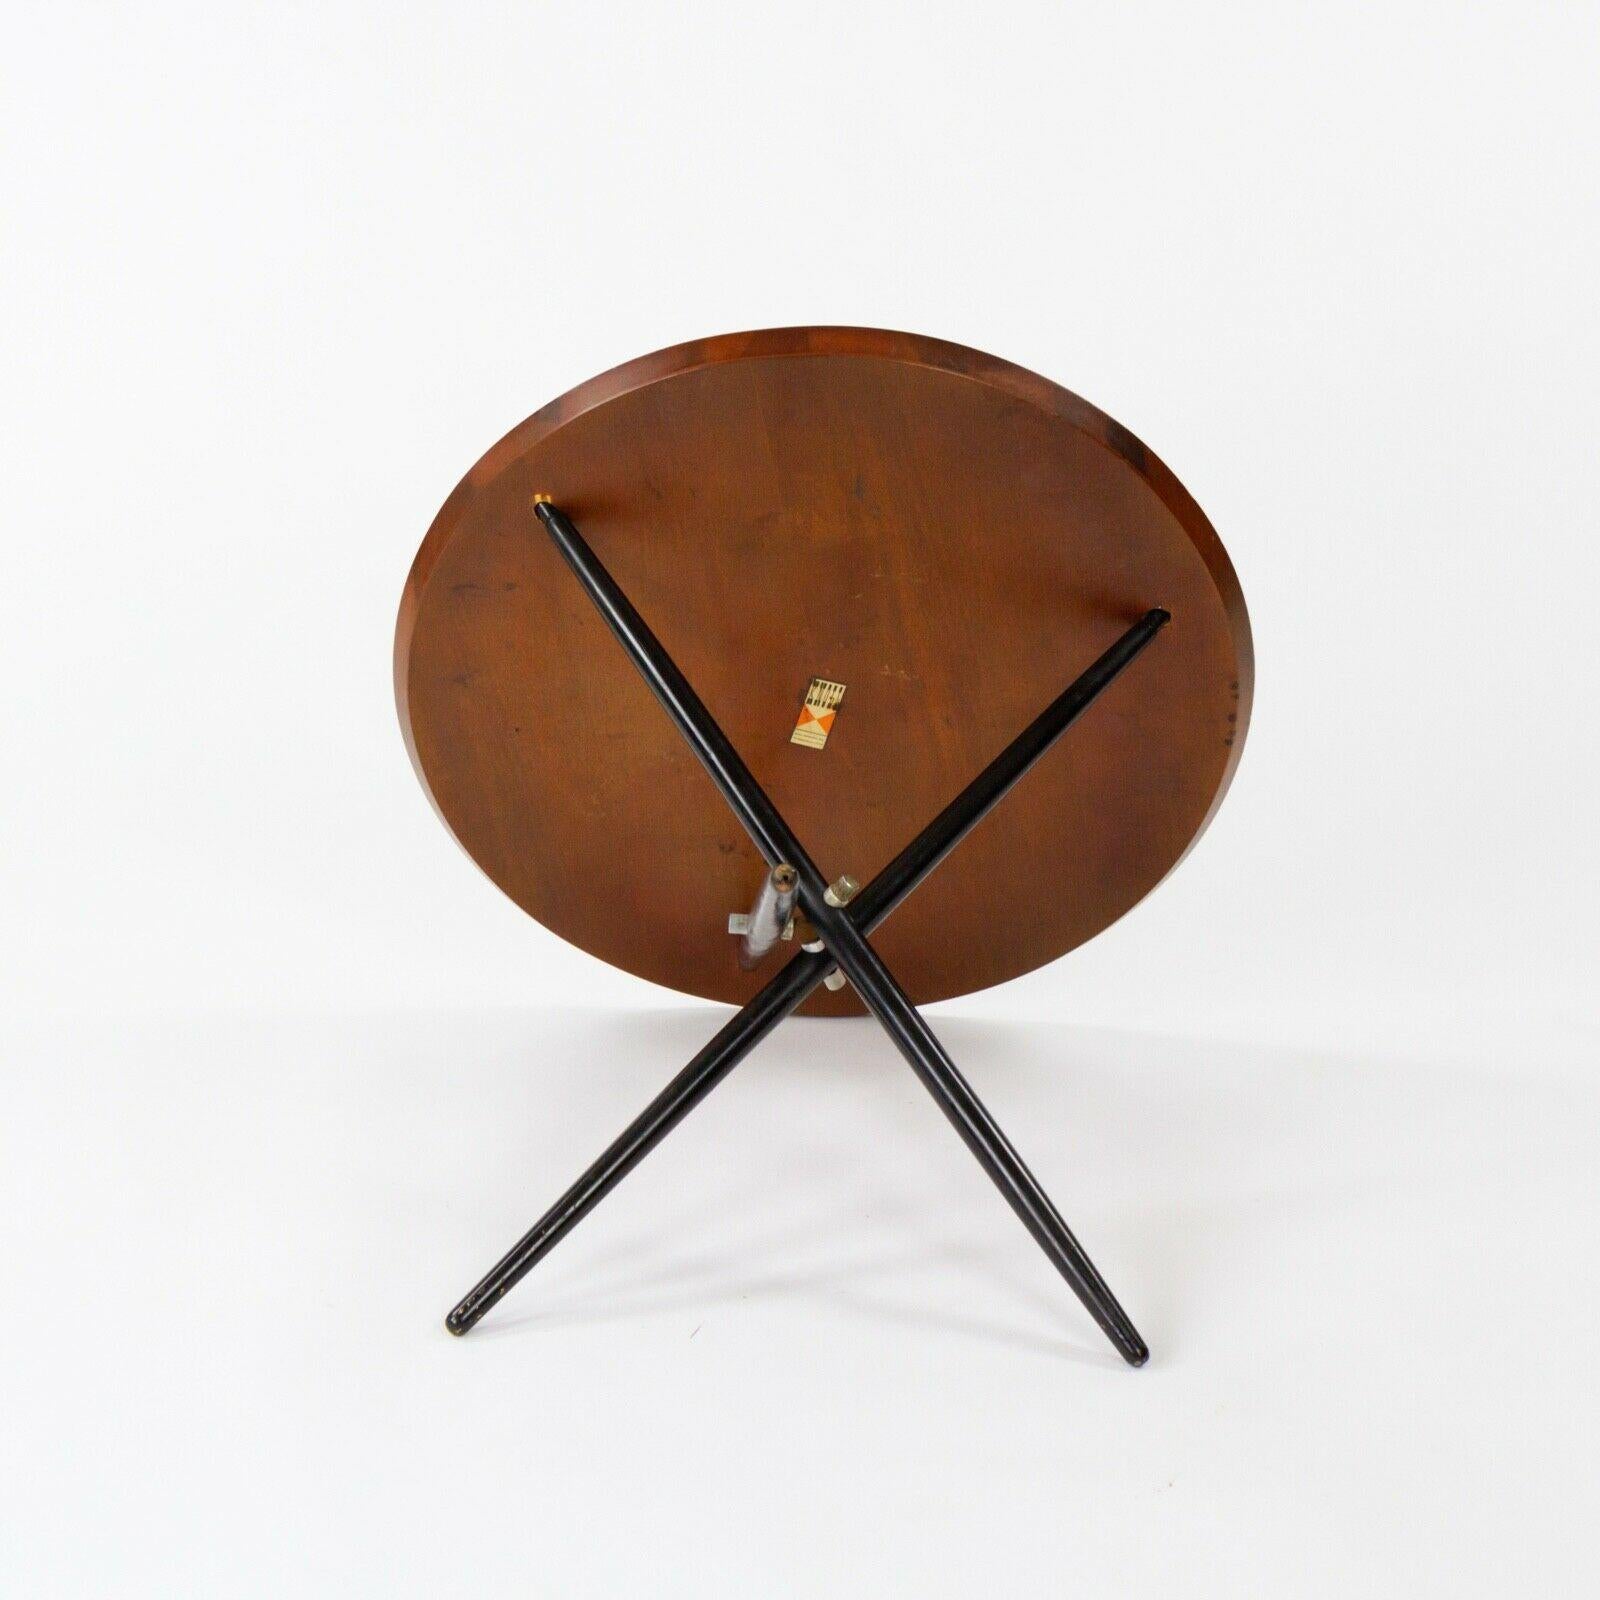 Mid-20th Century 1951 Hans Bellman Small Tripod Table for Knoll Associates No. 103 with 24 in Top